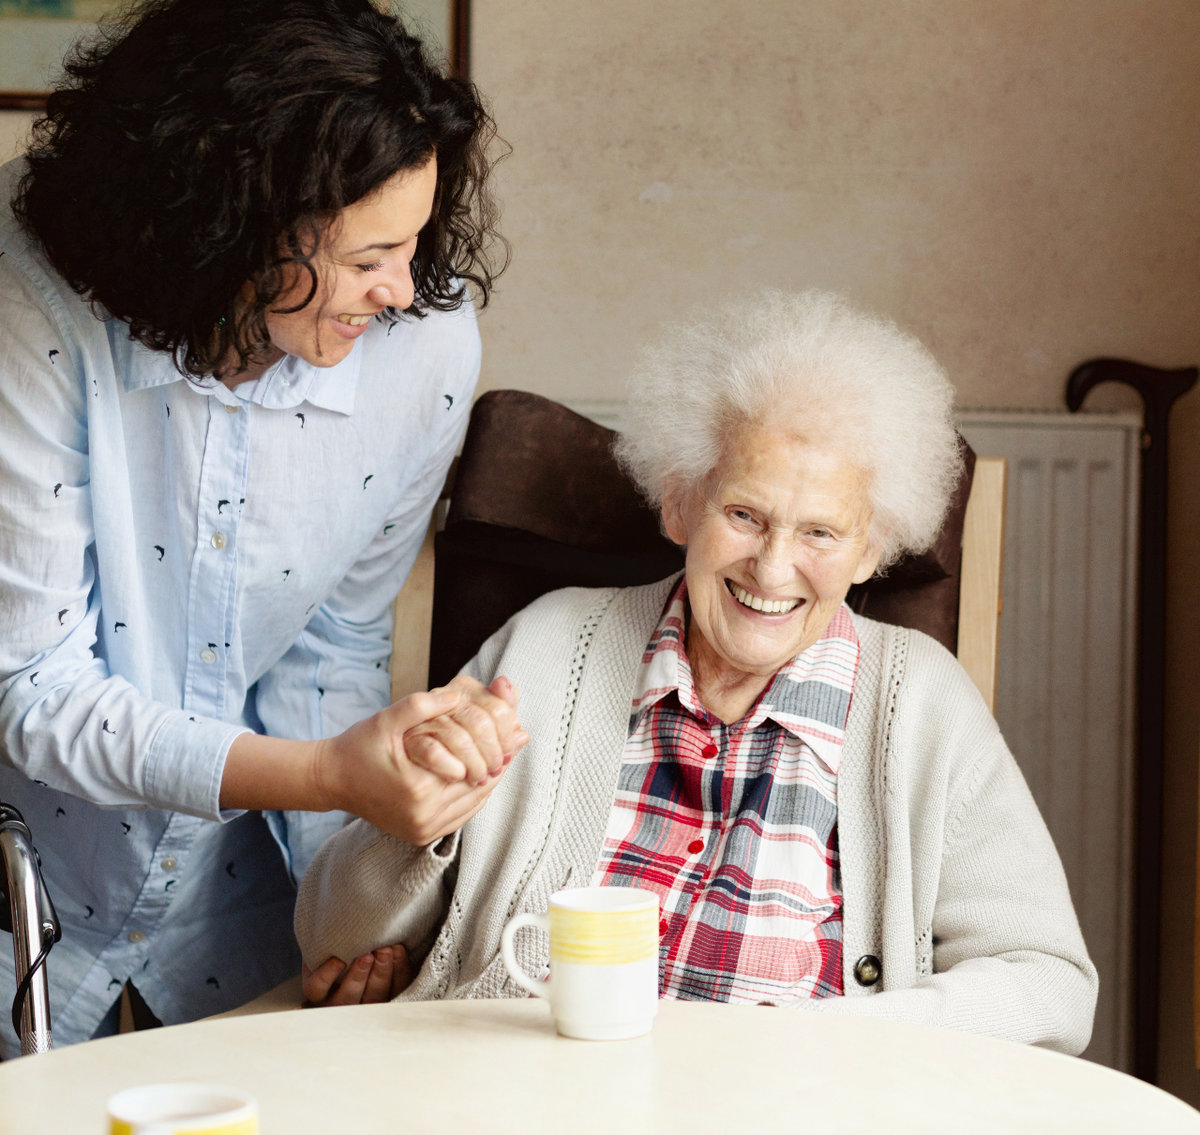 Hispanic caregiver smiling and helping an elderly lady drinking tea